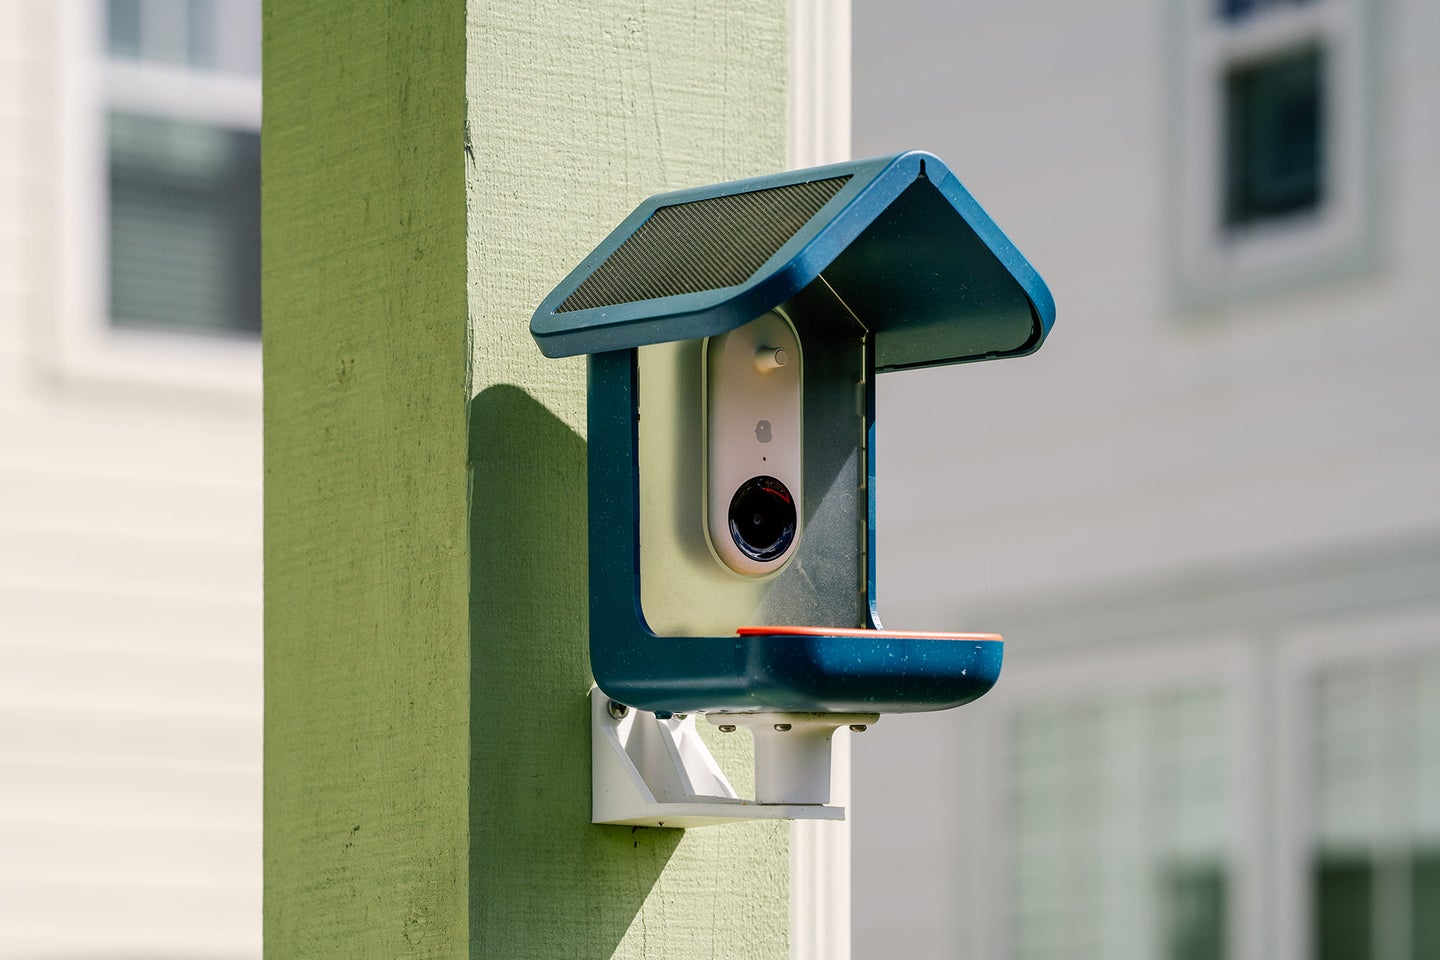 A blue Bird Buddy is mounted on a post in front of a house.